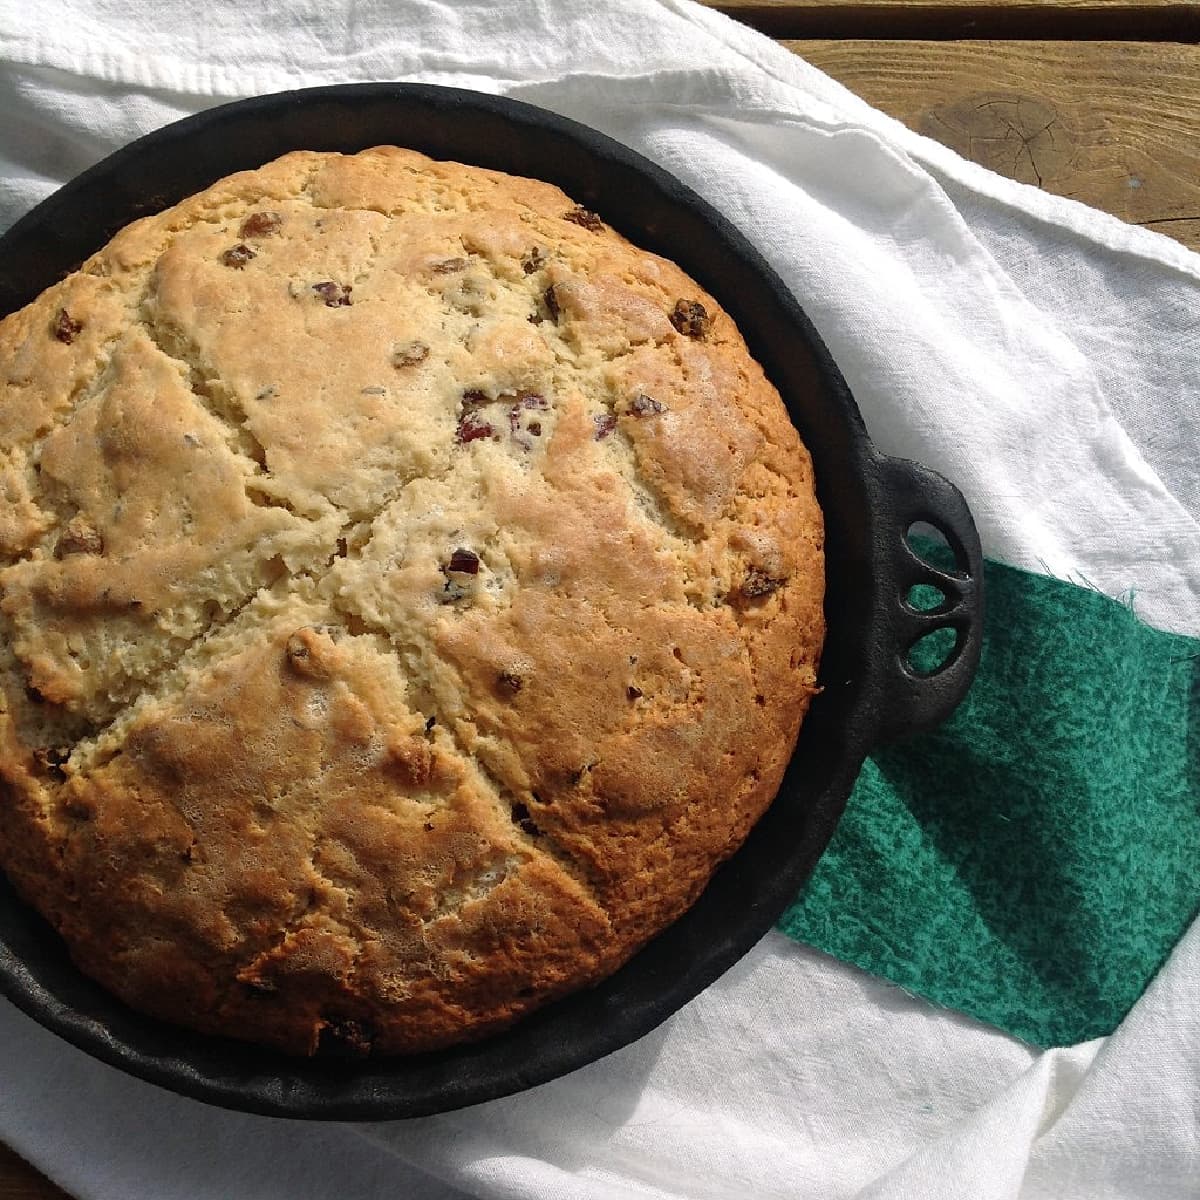 Round loaf of soda bread dotted with raisins, baked in a cast iron pie dish.